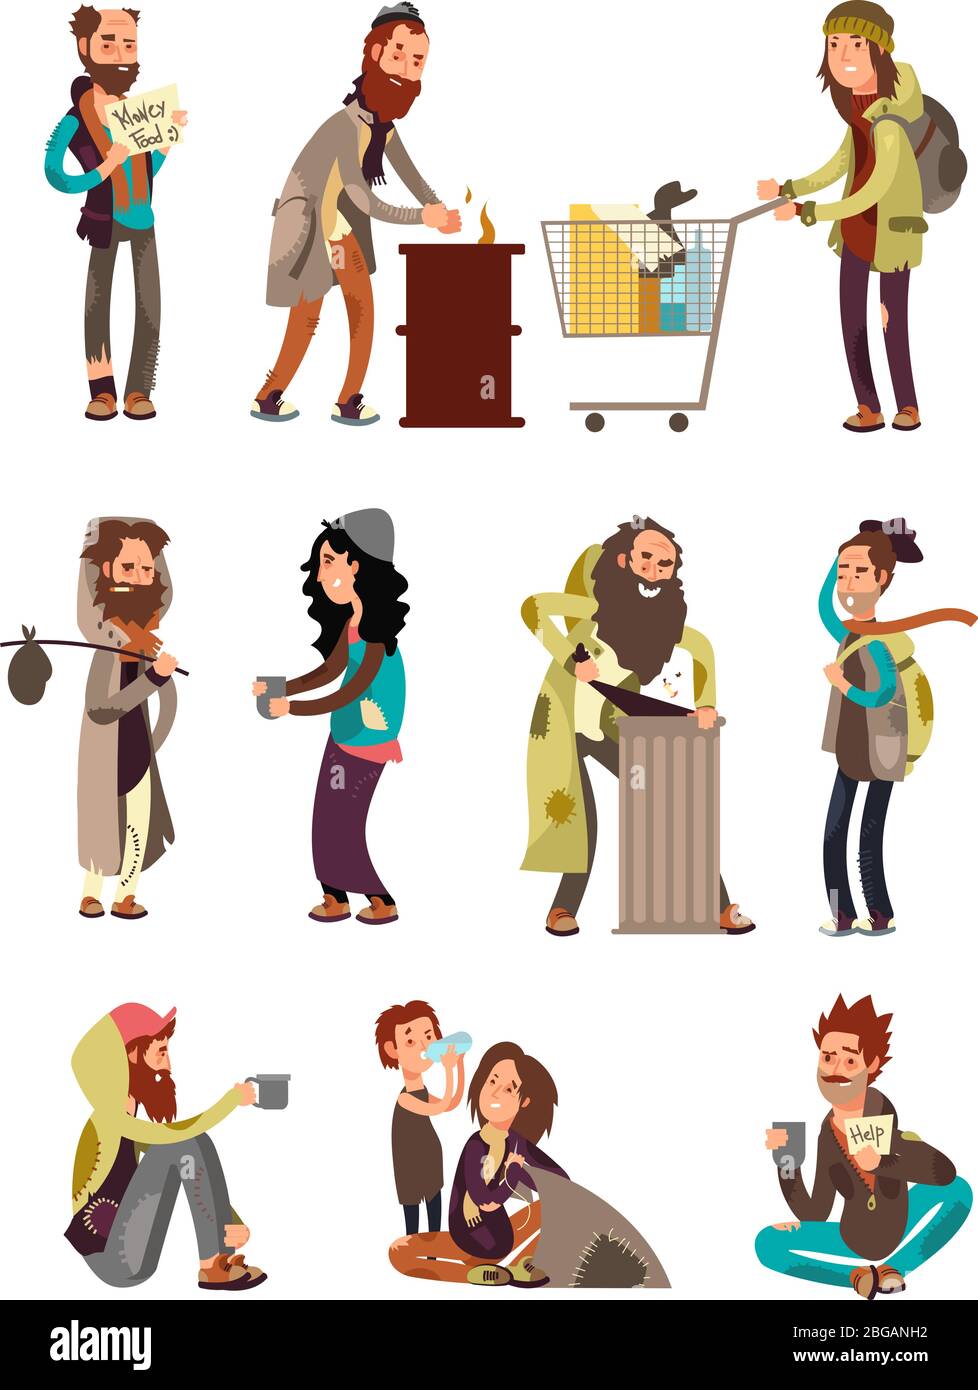 Poor unhappy homeless cartoon people needing financial help. Vector characters set. Illustration of beggar cartoon, character poverty and dirty in depressio Stock Vector